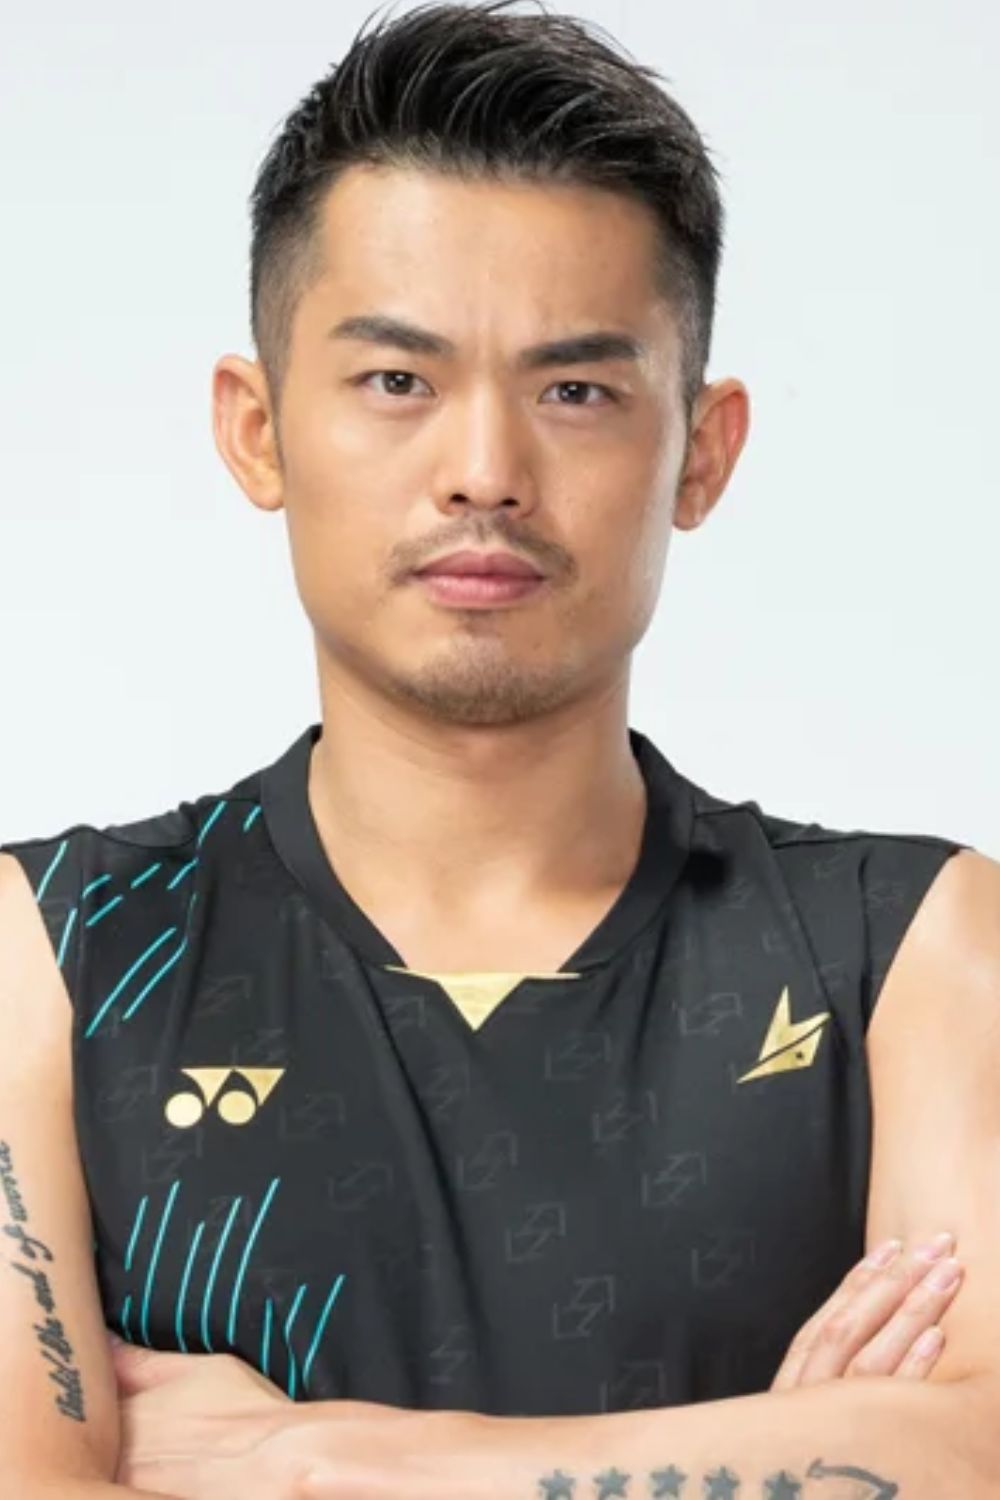 Lin Dan Is A Two-Time Olympic Champion Badminton Player (Source: Pinterest)